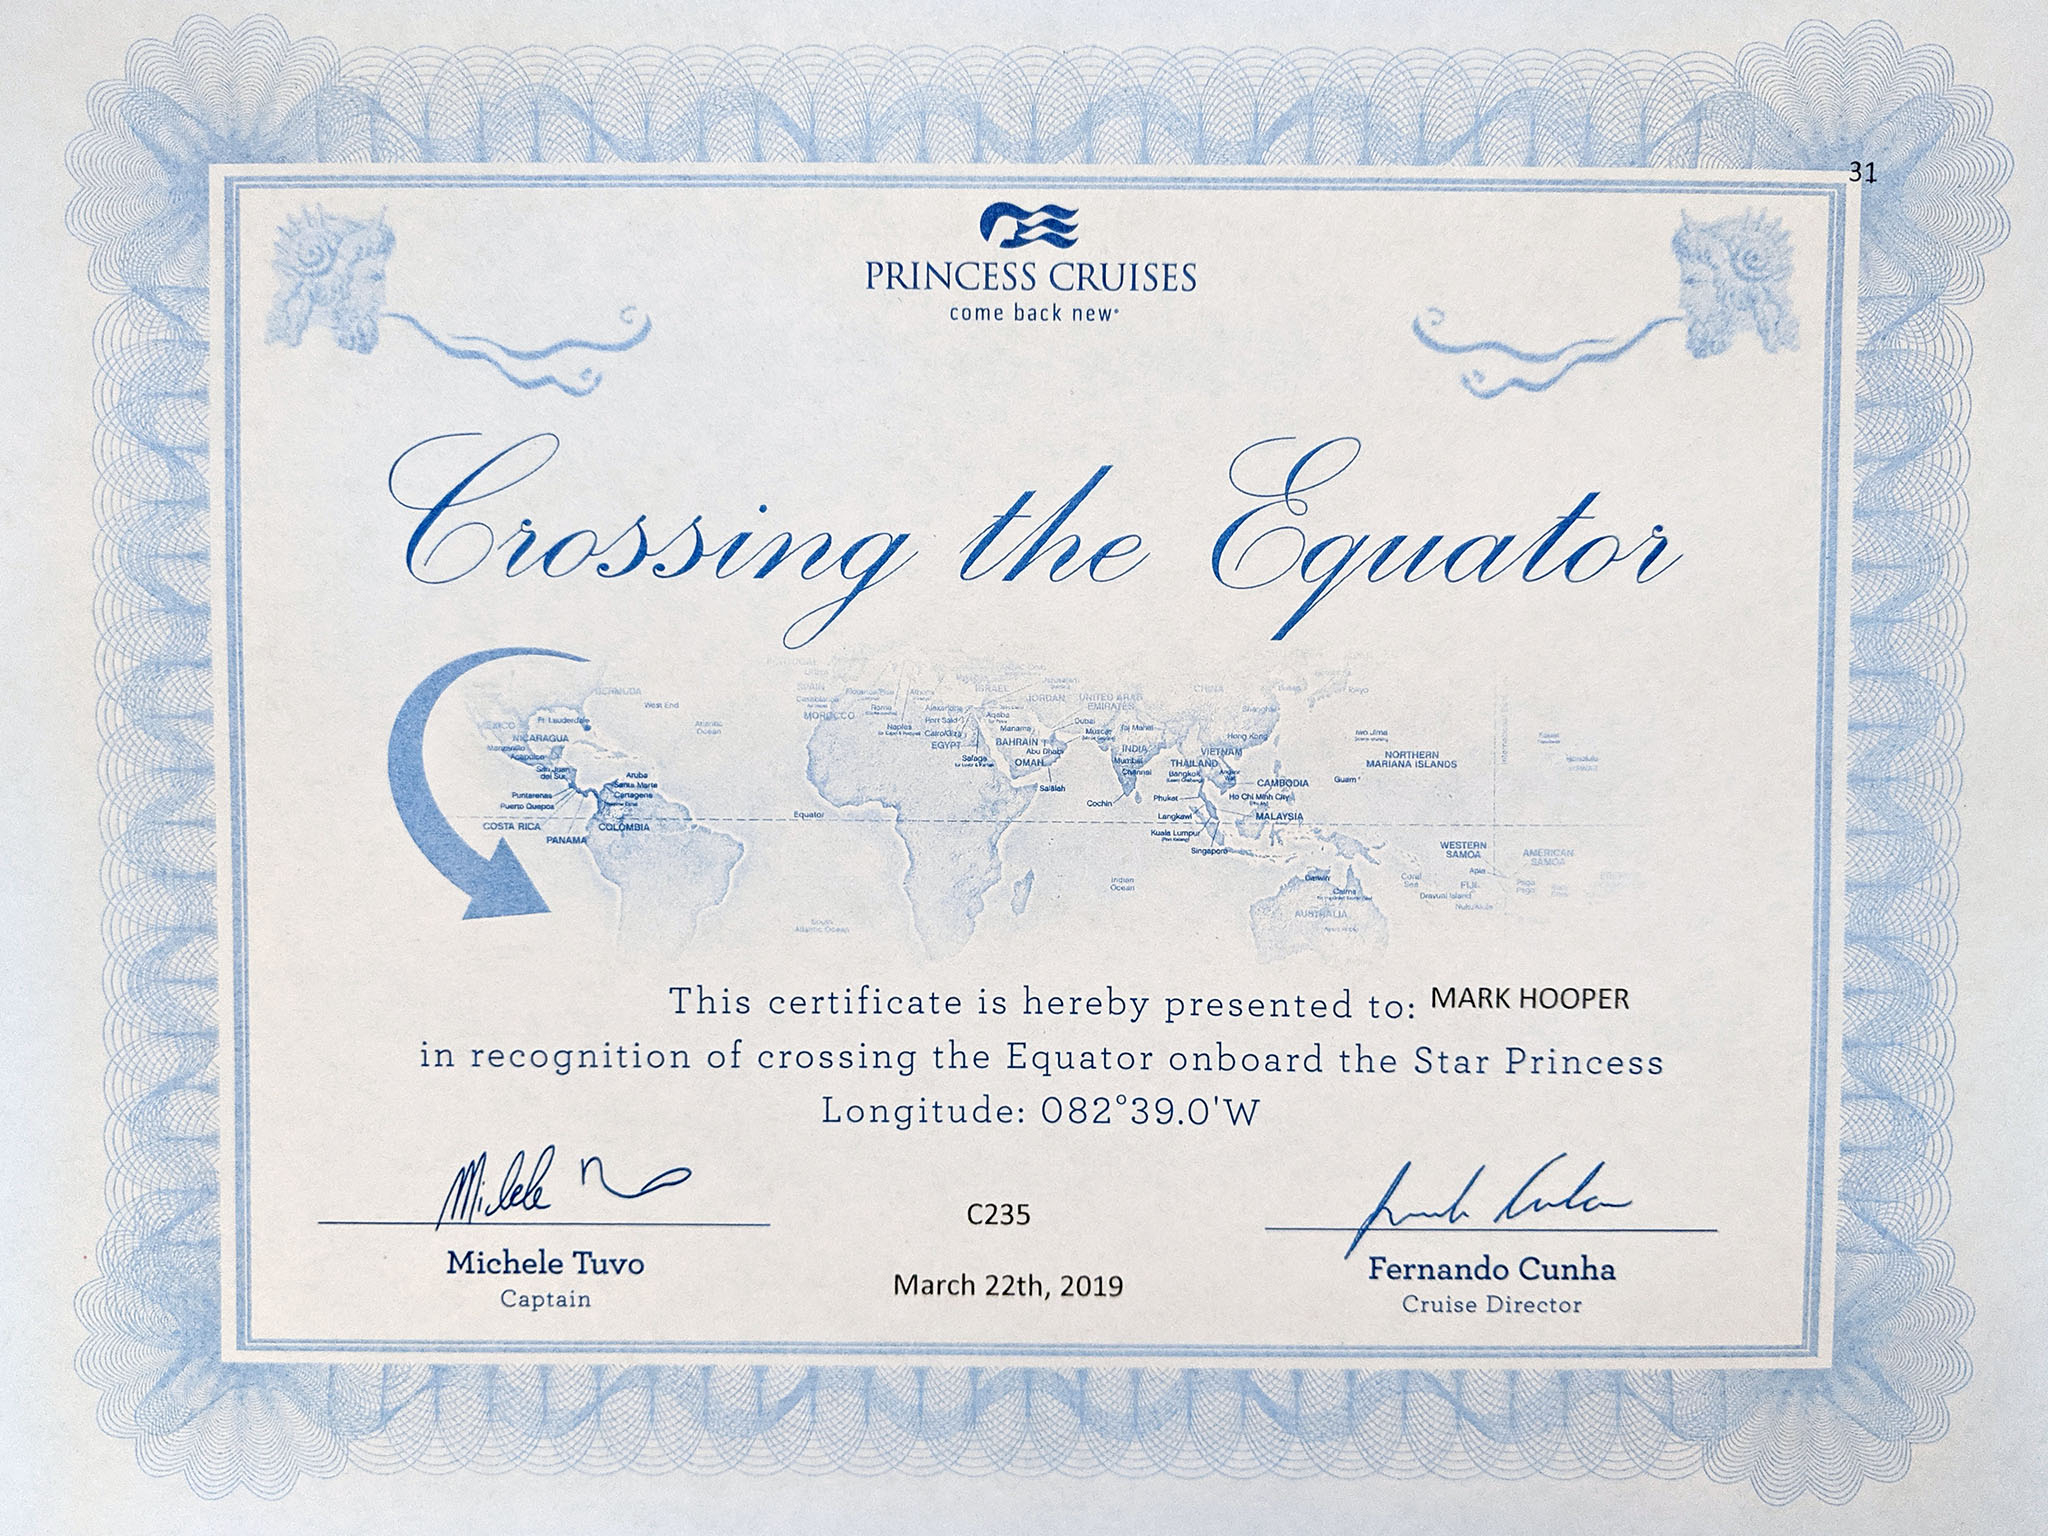 Crossing The Line Ceremony With Princess Cruises  neOnbubble Throughout Crossing The Line Certificate Template